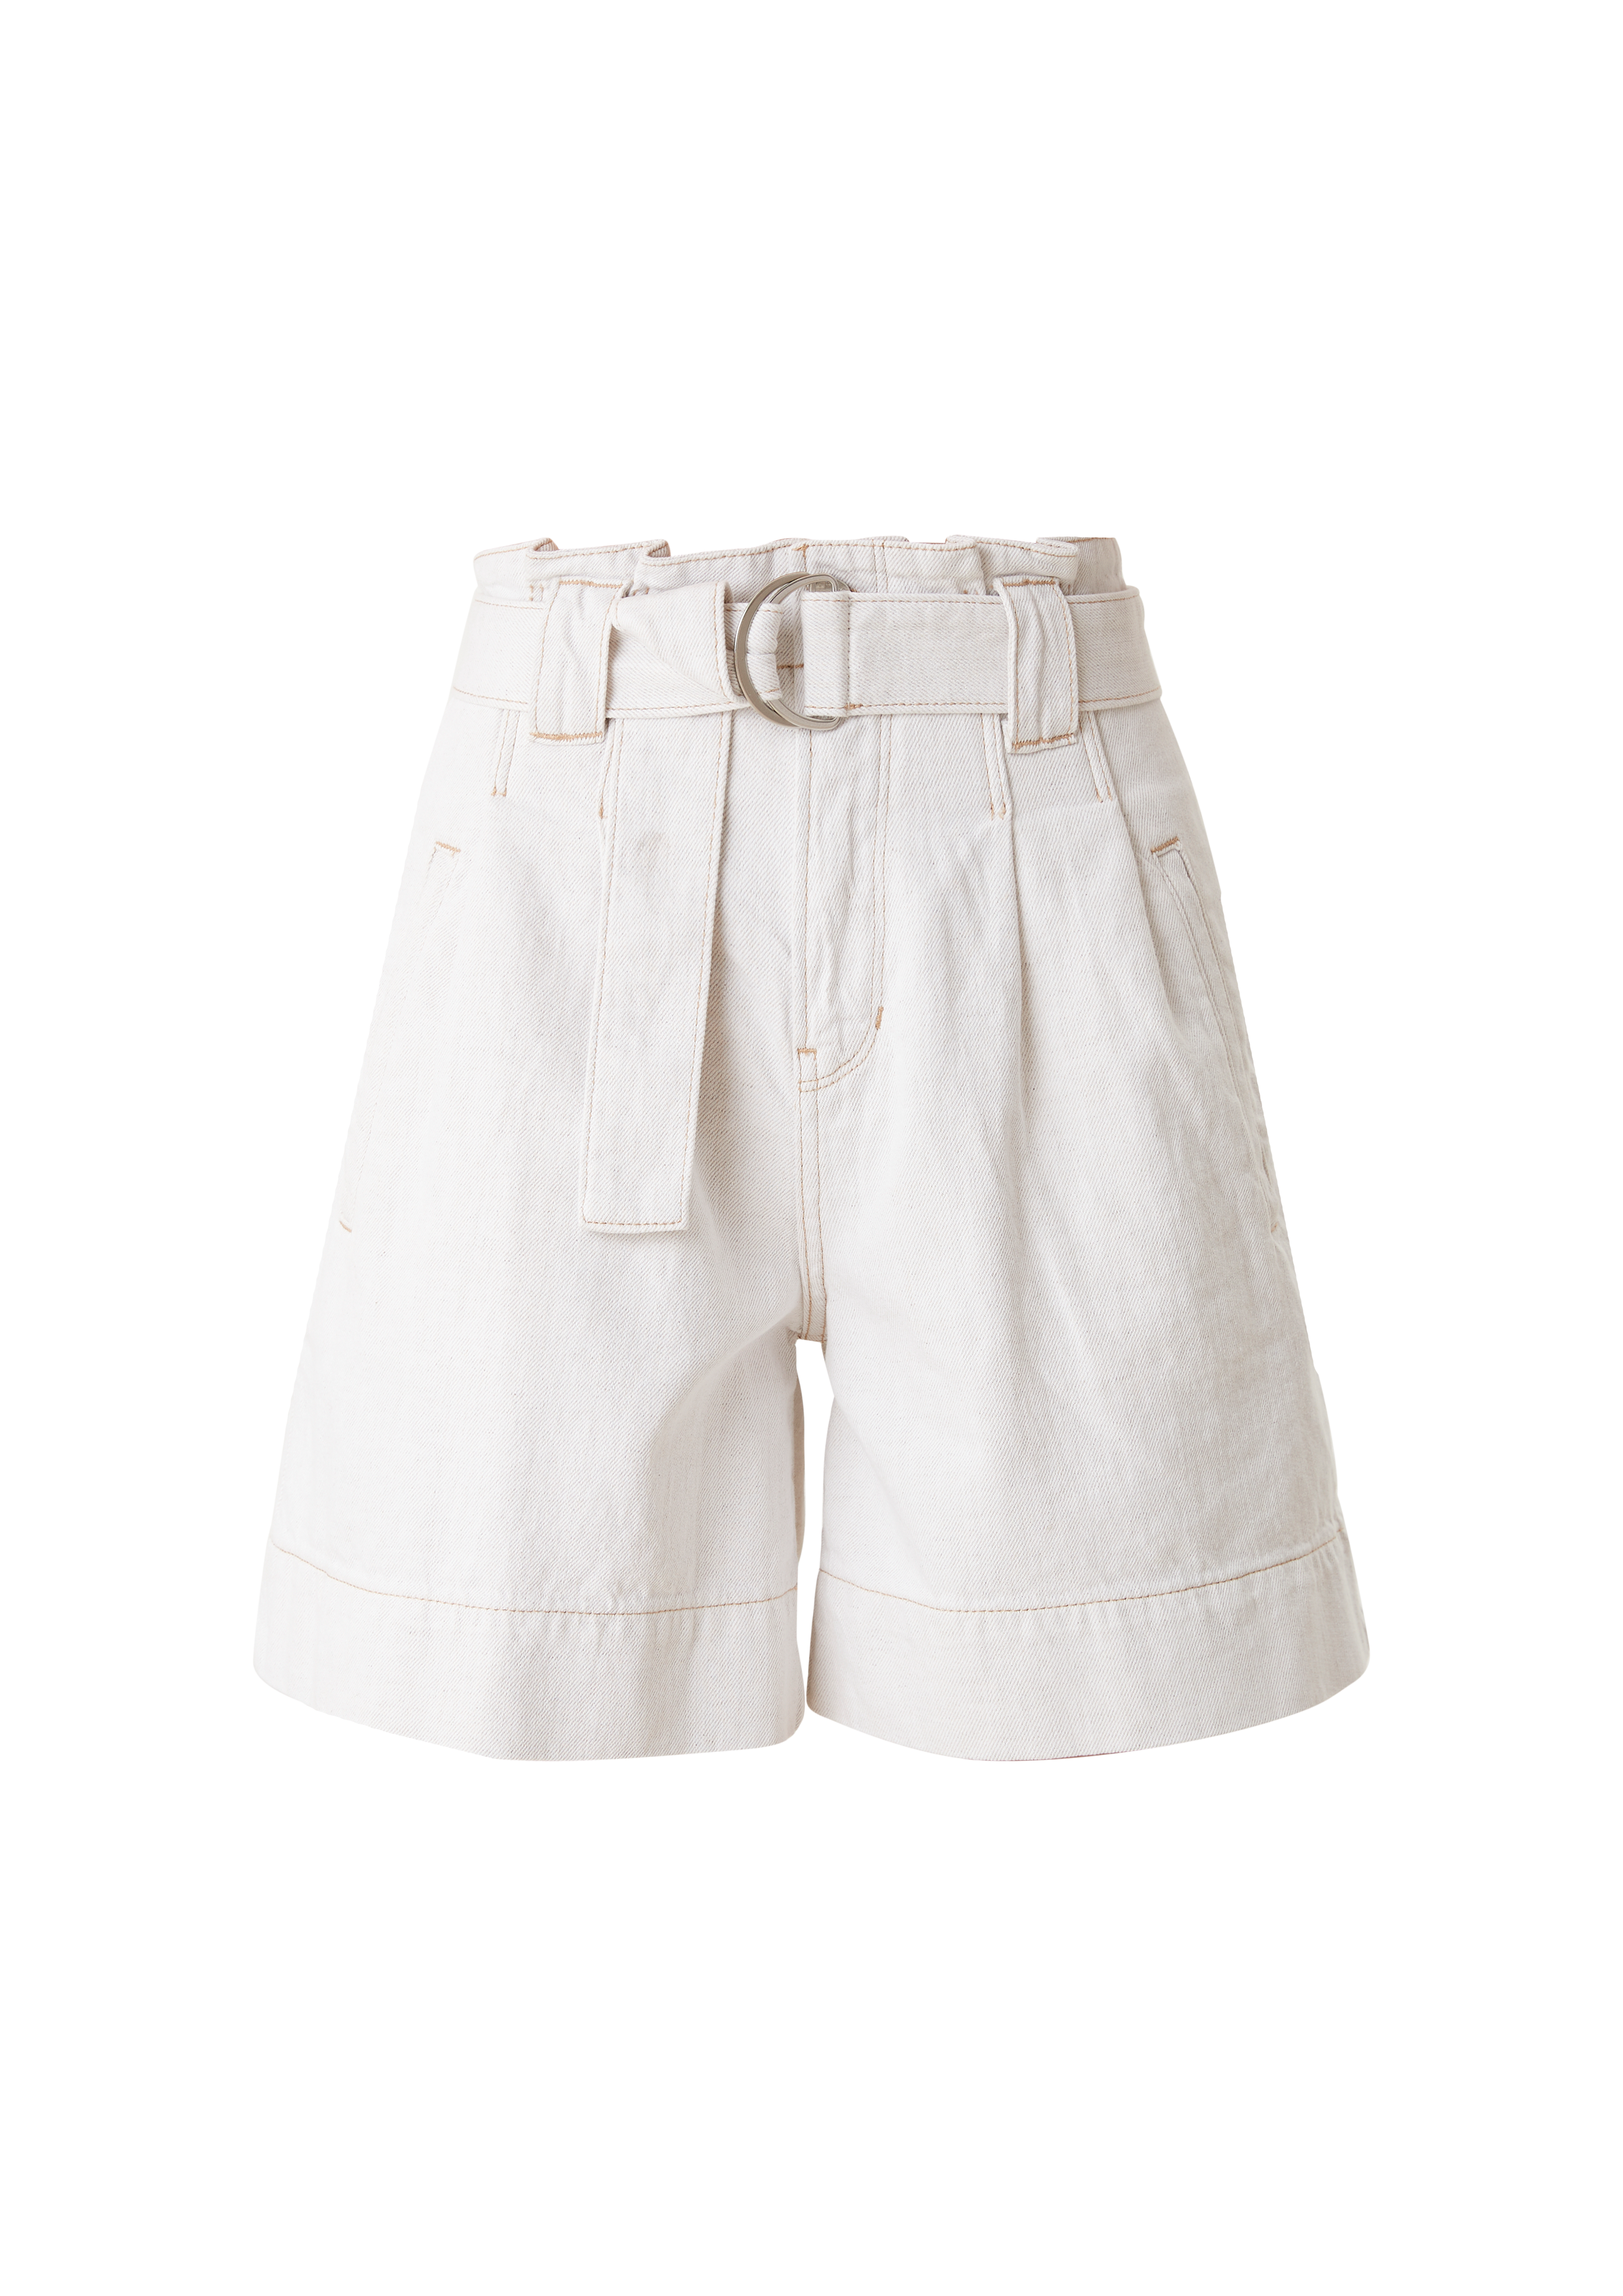 Shorts in a cotton-linen blend from s.Oliver